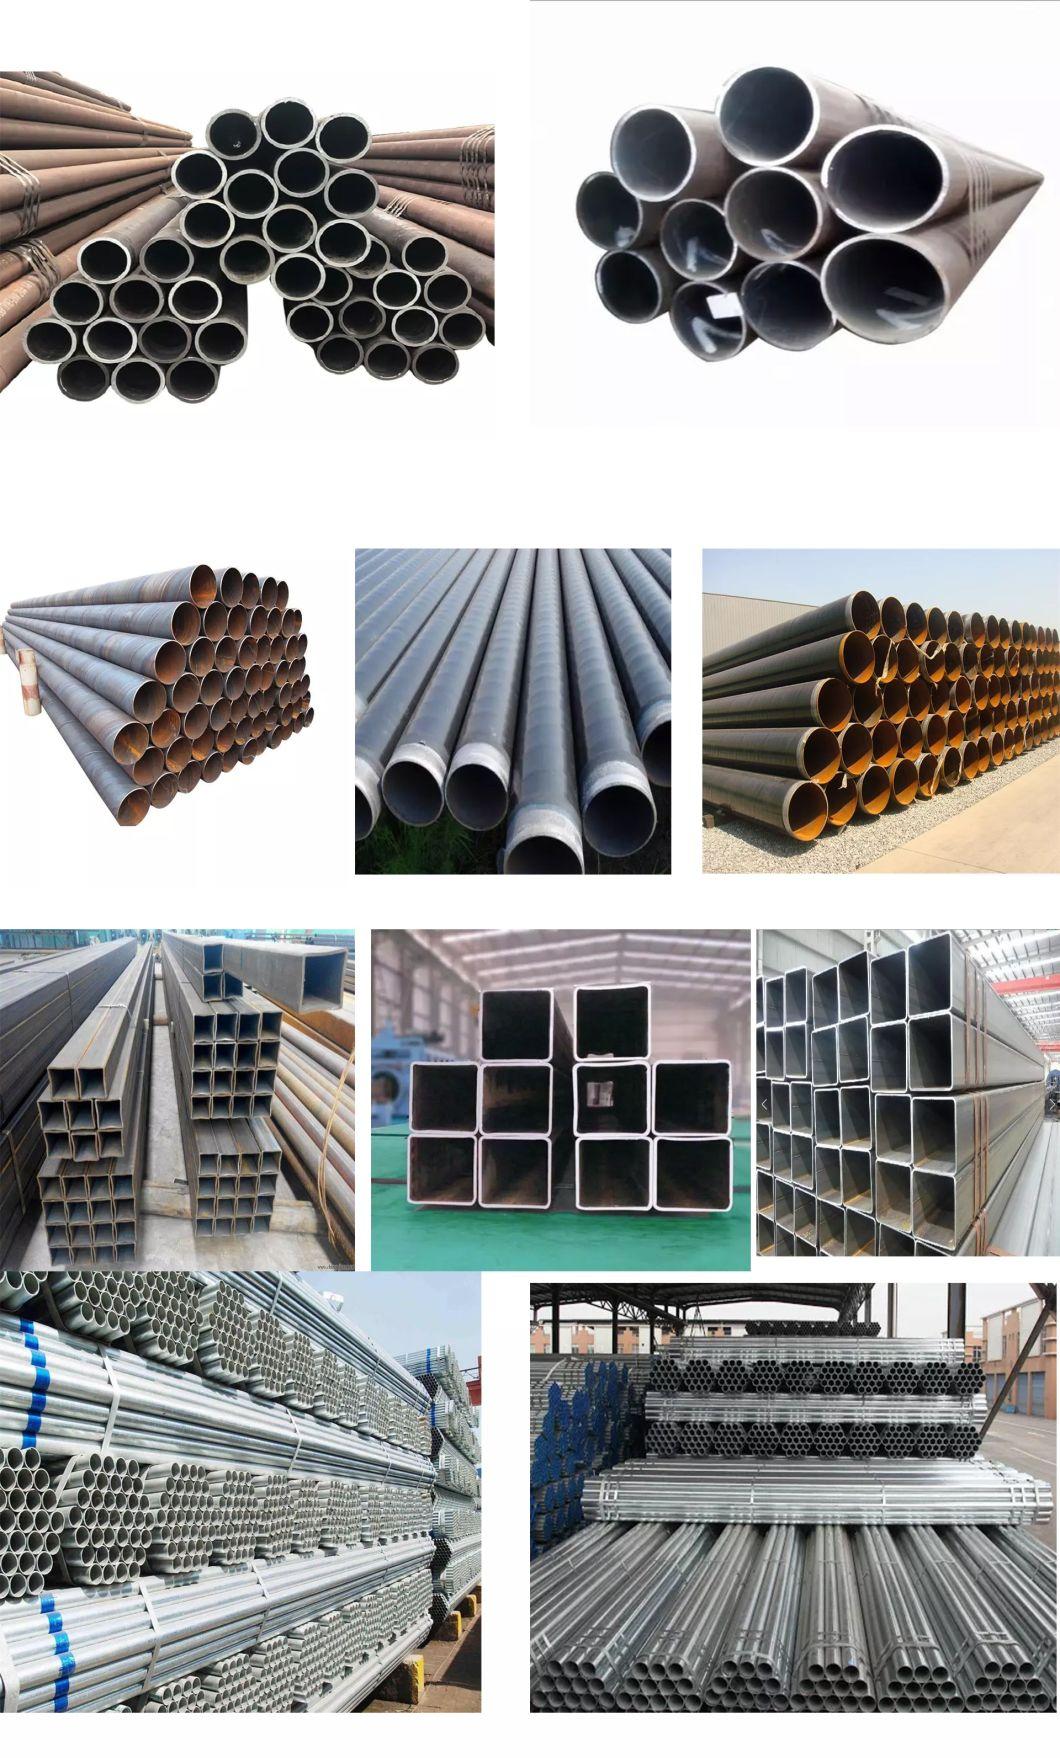 JIS G3445 Stkm 13c Cold Rolled Seamless Steel Honed Tube